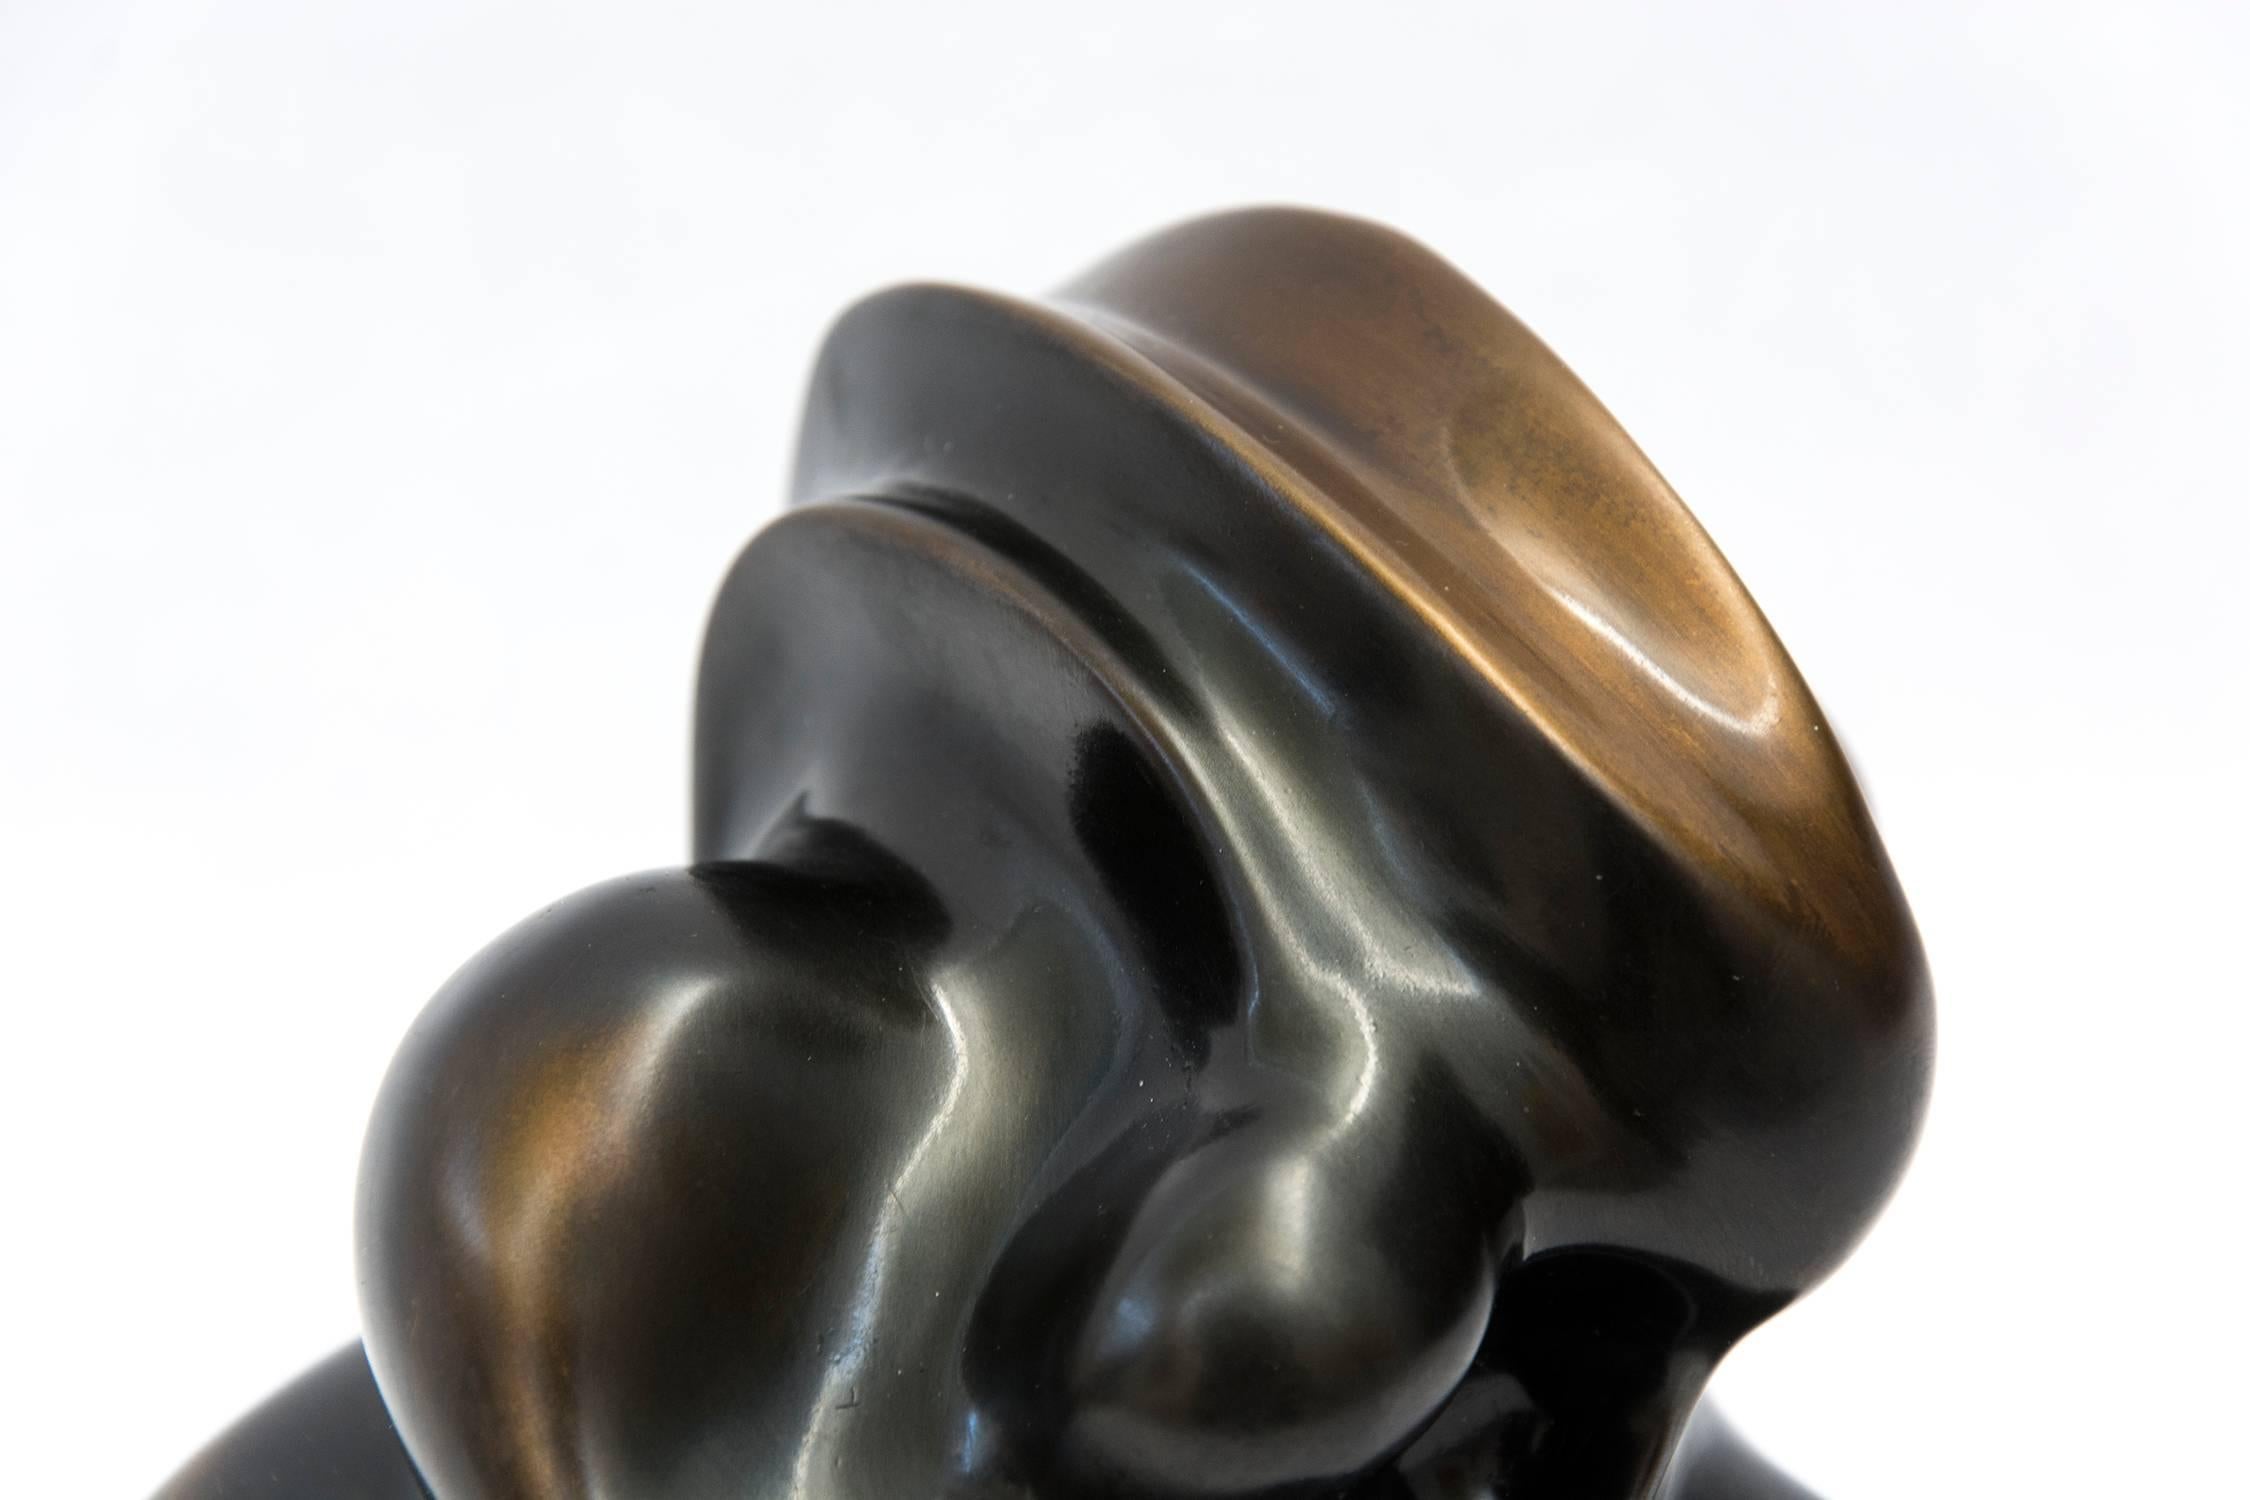 Patinated cast bronze takes an organic form that twists and breathes as it emerges from its base. The dynamic movement of this intimately sized sculpture is informed by Tim Forbes' training in graphic and interior design. 

After completing studies